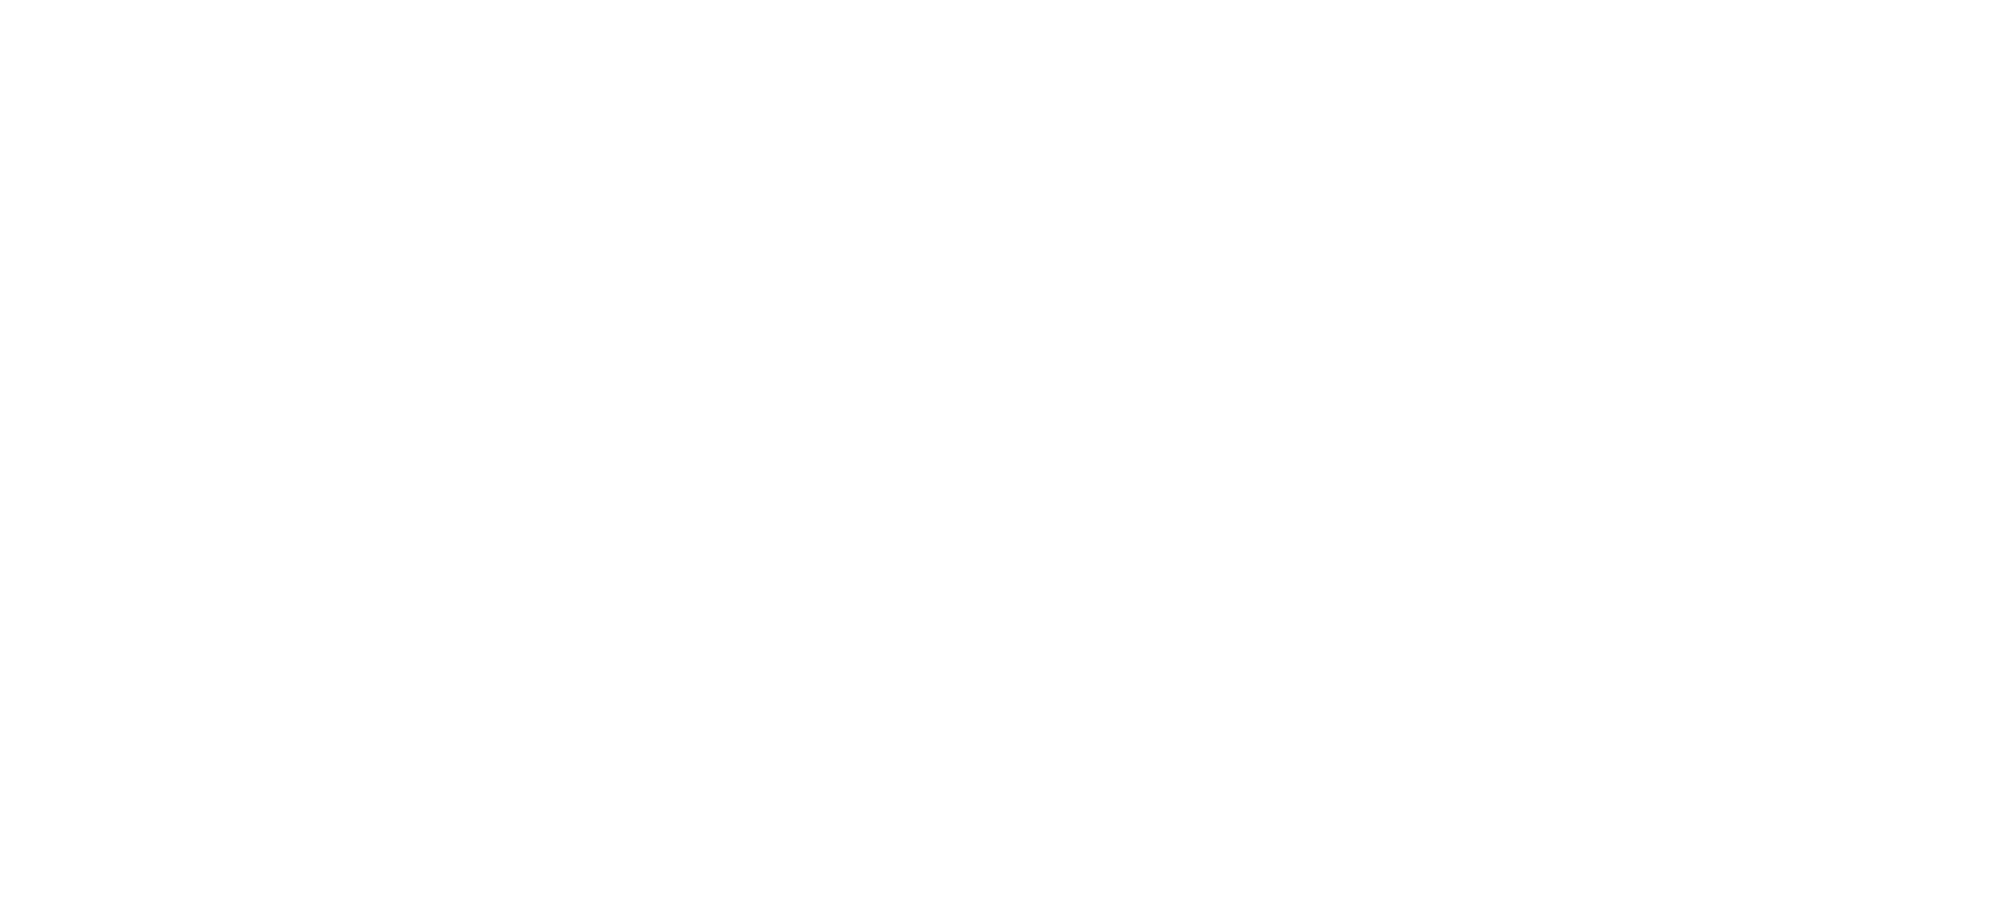 luxtemplates logo excel dashboards